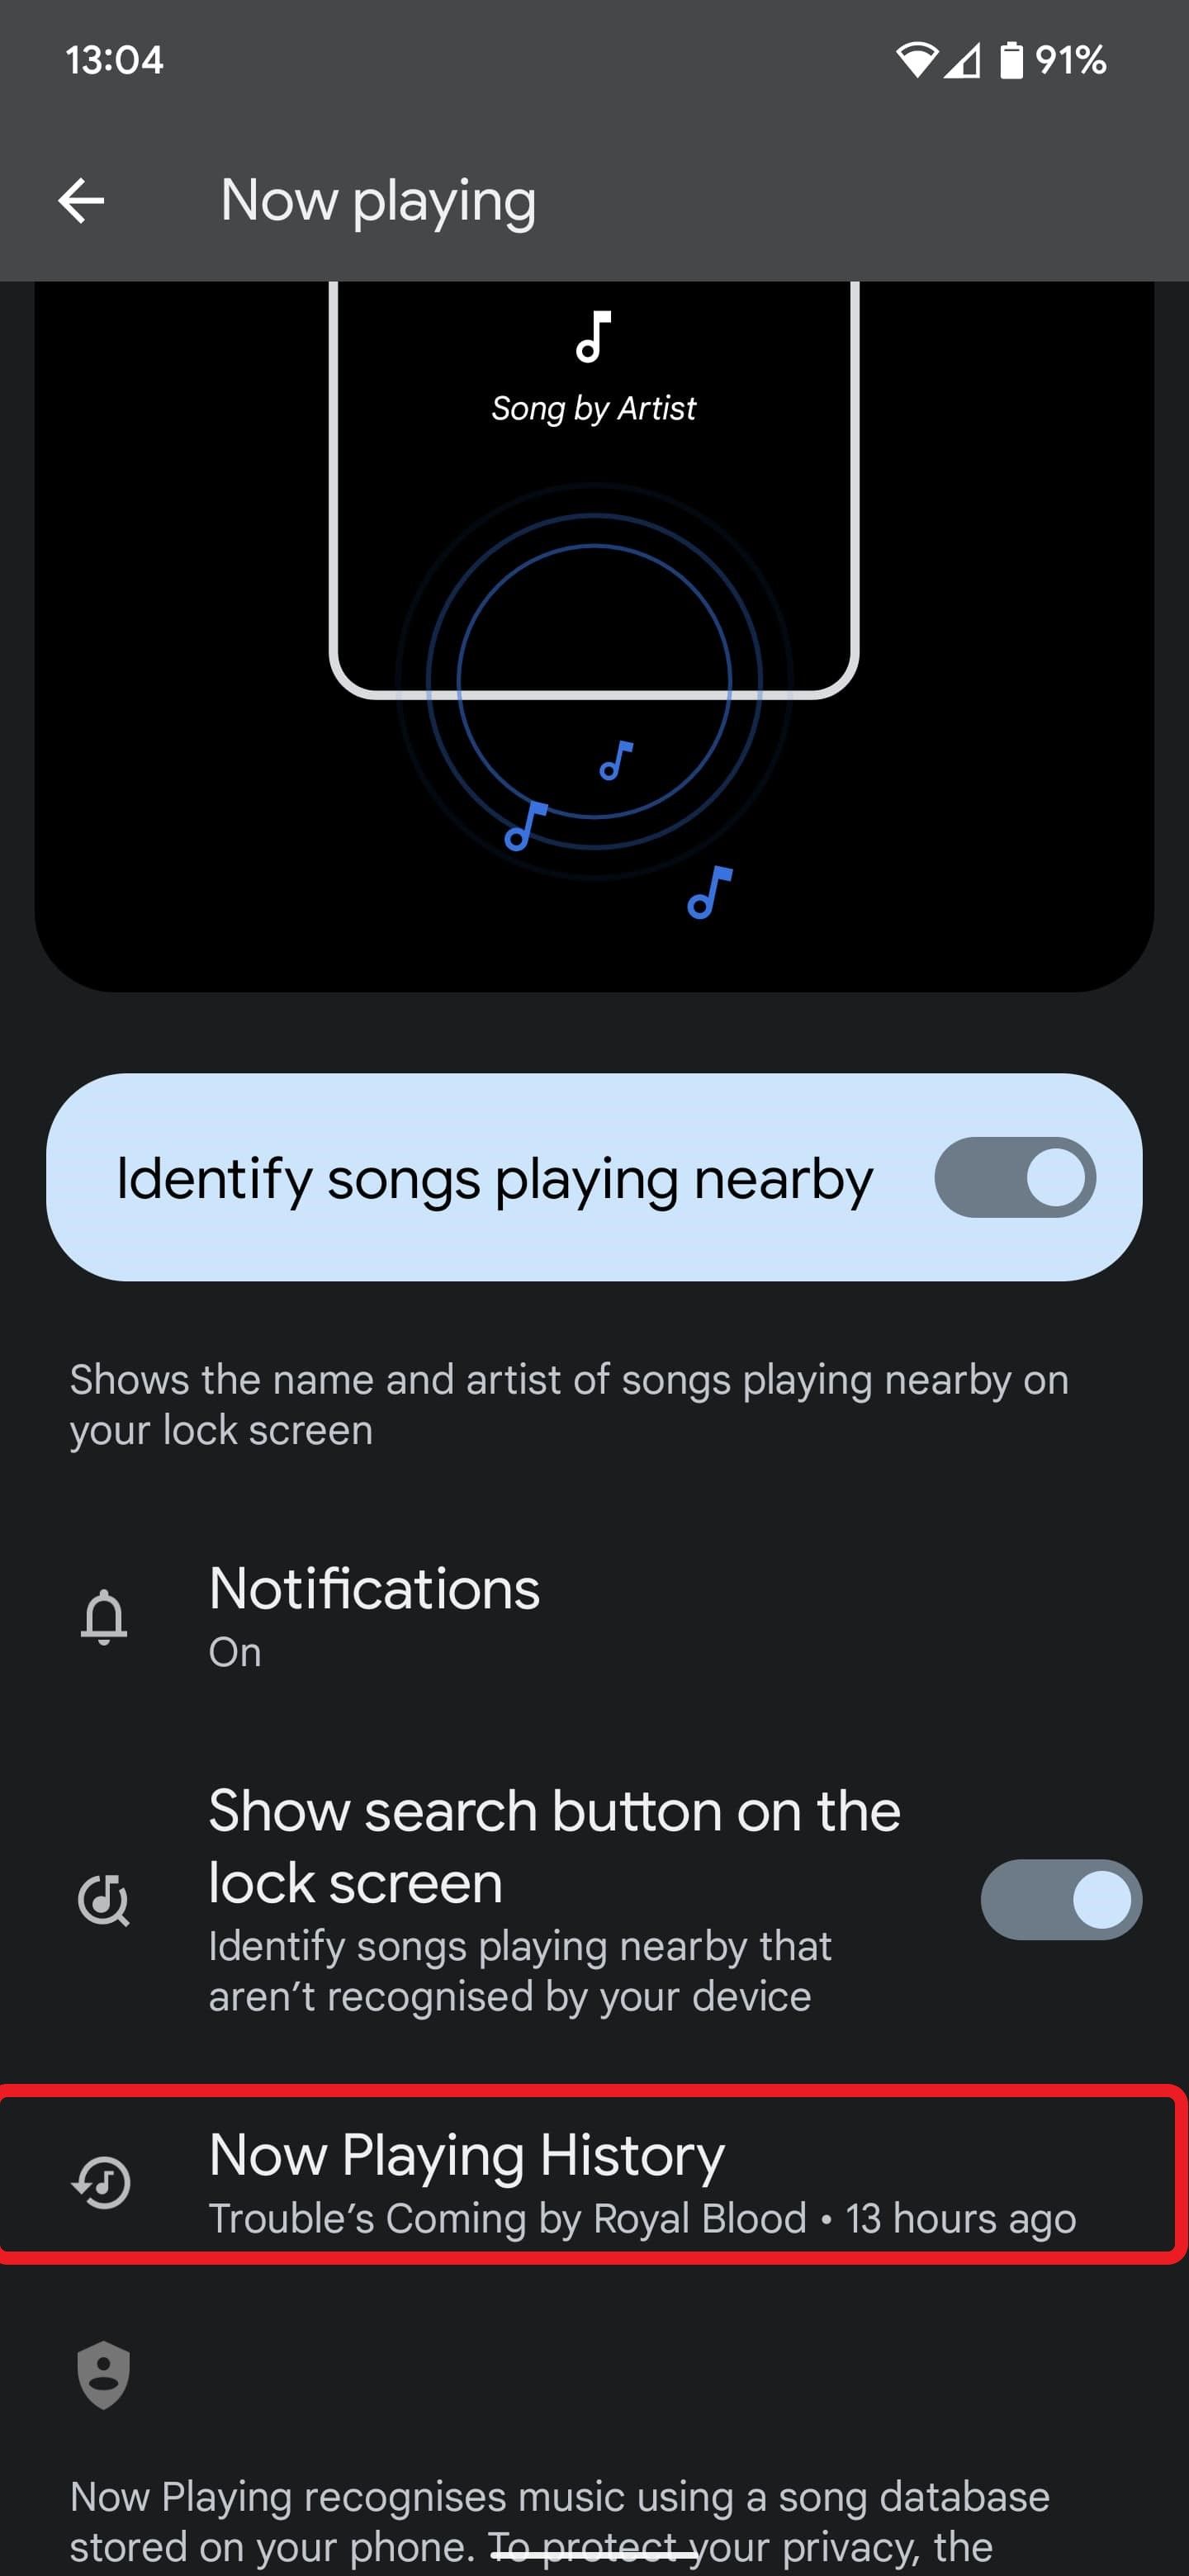 The Now playing settings with a red box around the Now Playing History option